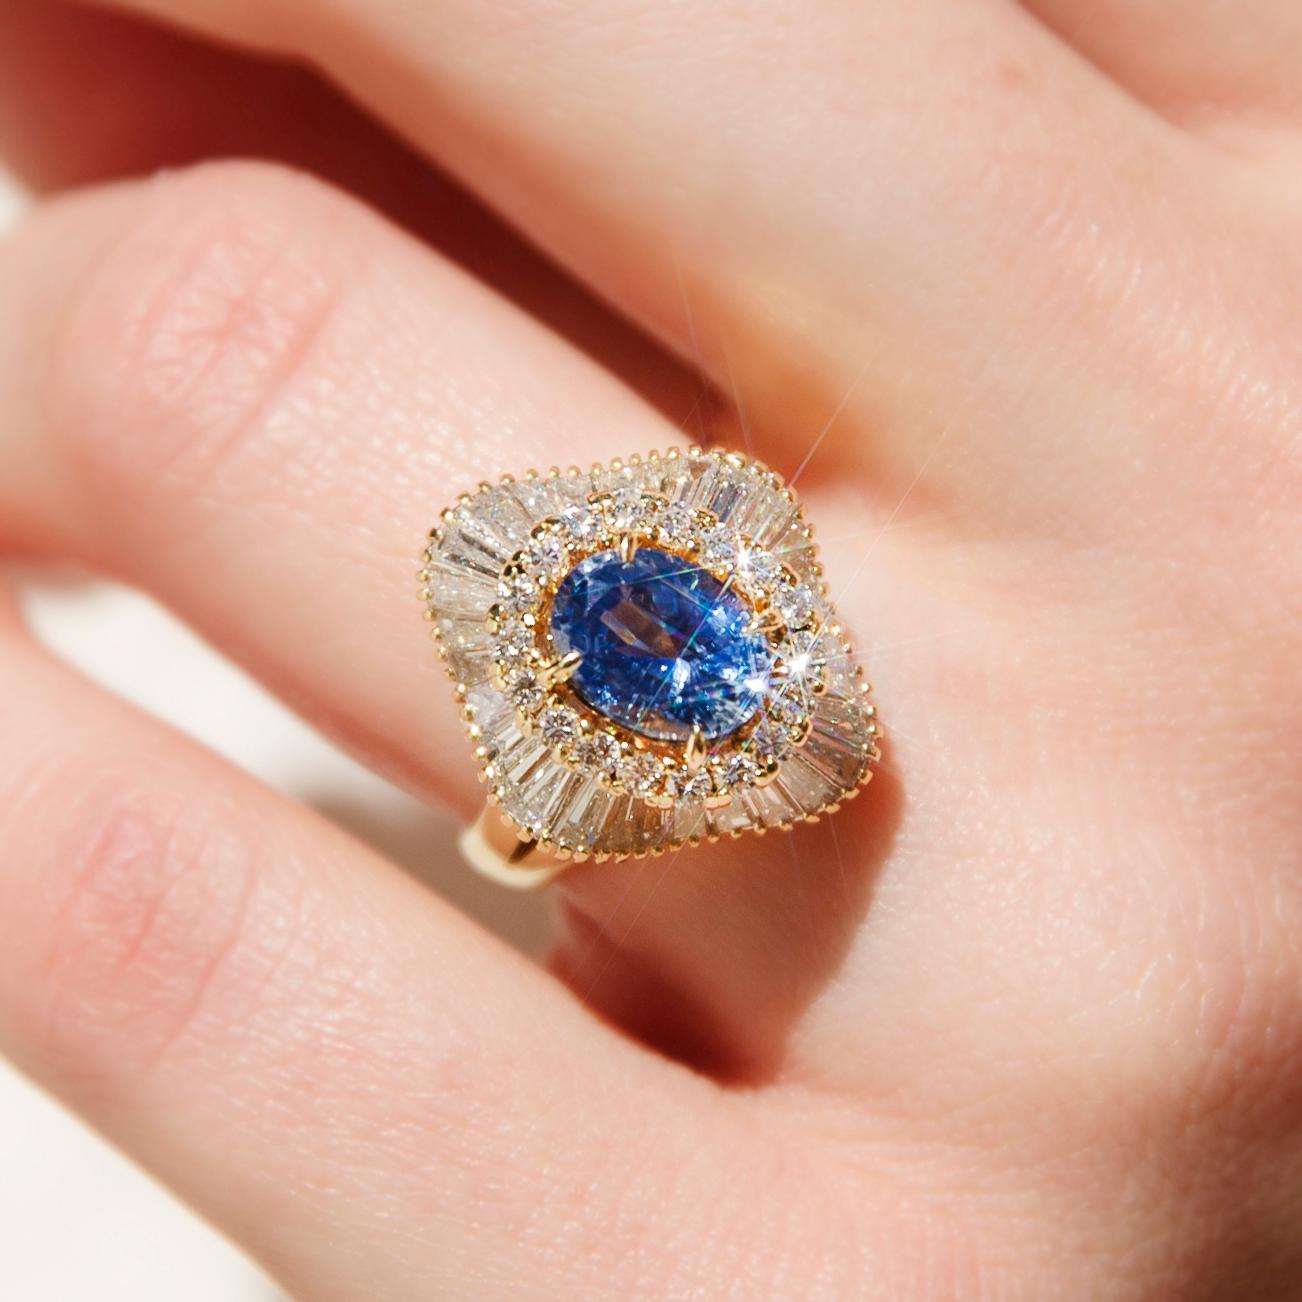 Expertly hand-crafted in 18 carat gold The Gianna Ring is glamour steeped in fortitude. Her bold sapphire, set in halos of undulating round brilliant and baguette diamonds, sparkles demands our reverence. Walk confidently through your world with